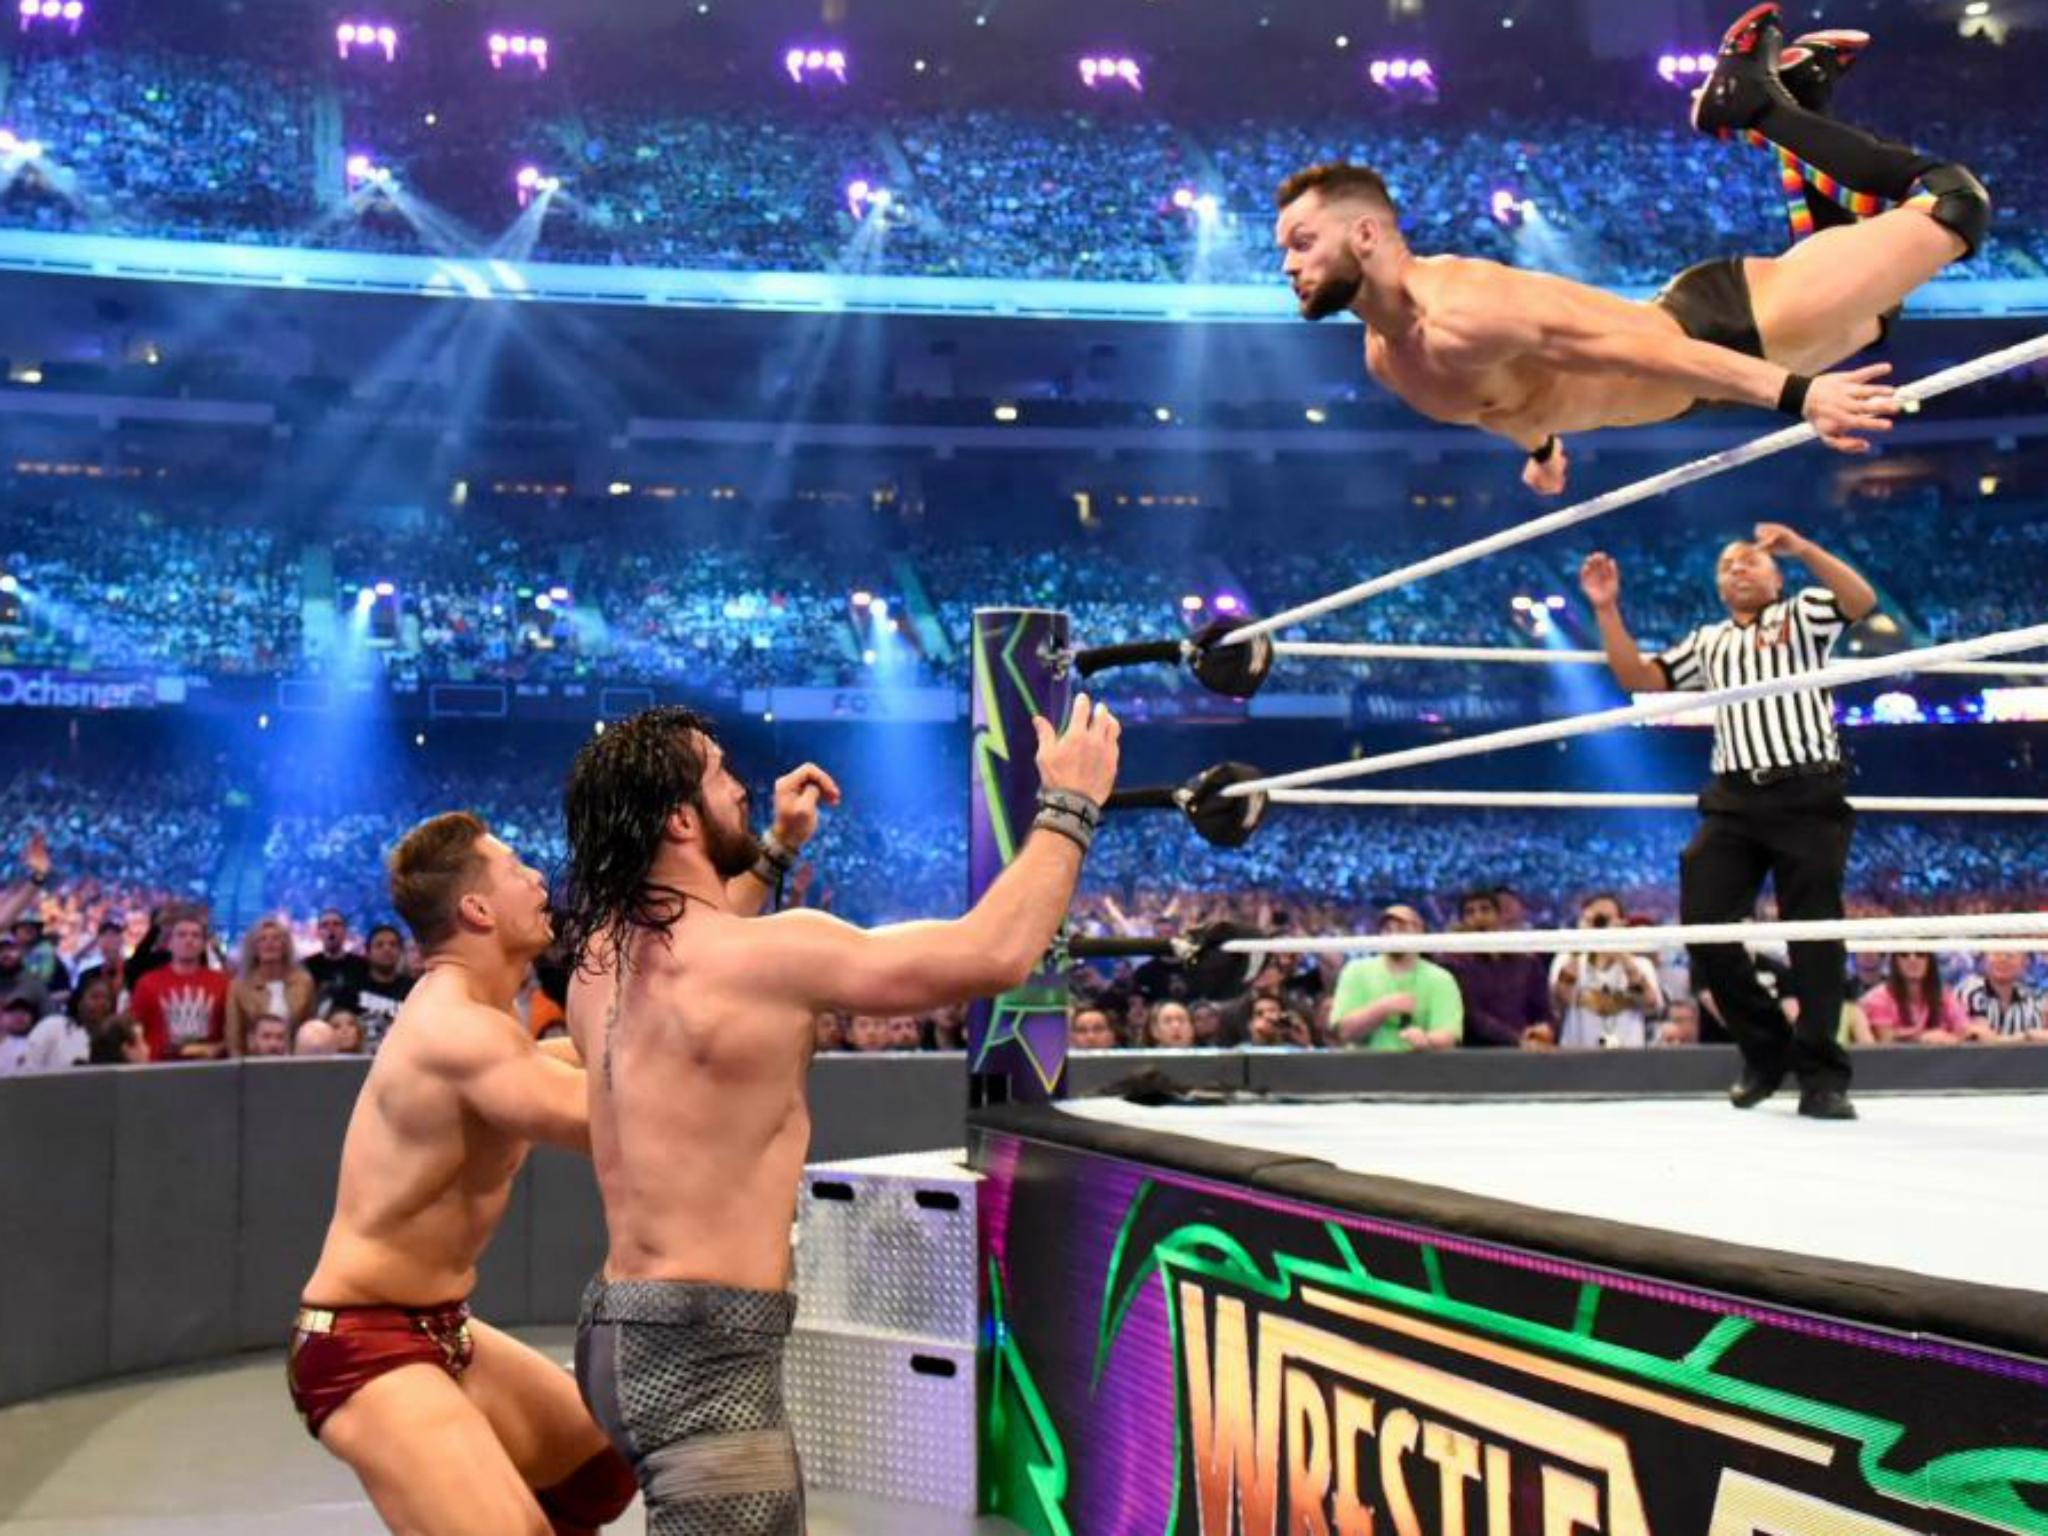 Finn Balor?soars over the top rope to splash onto Rollins and The Miz